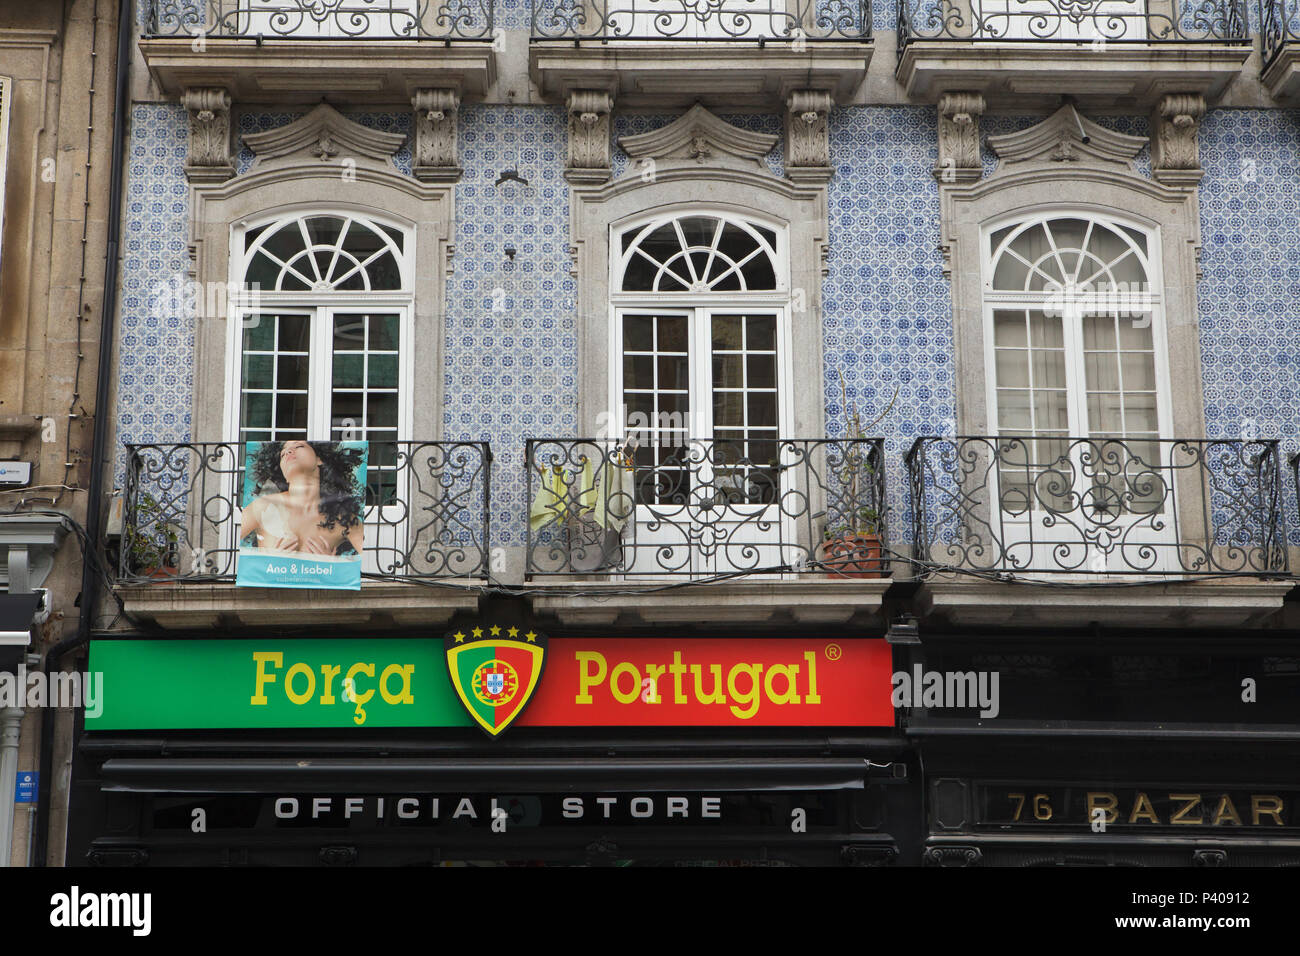 Força Portugal official store in Porto, Portugal. Força Portugal (Forward Portugal) is a Portuguese right of centre political alliance consisting of the Social Democratic Party and the People's Party. Advert of hairdressing saloon Ana & Isabel Cabeleireiros is seen above the store sign. Stock Photo